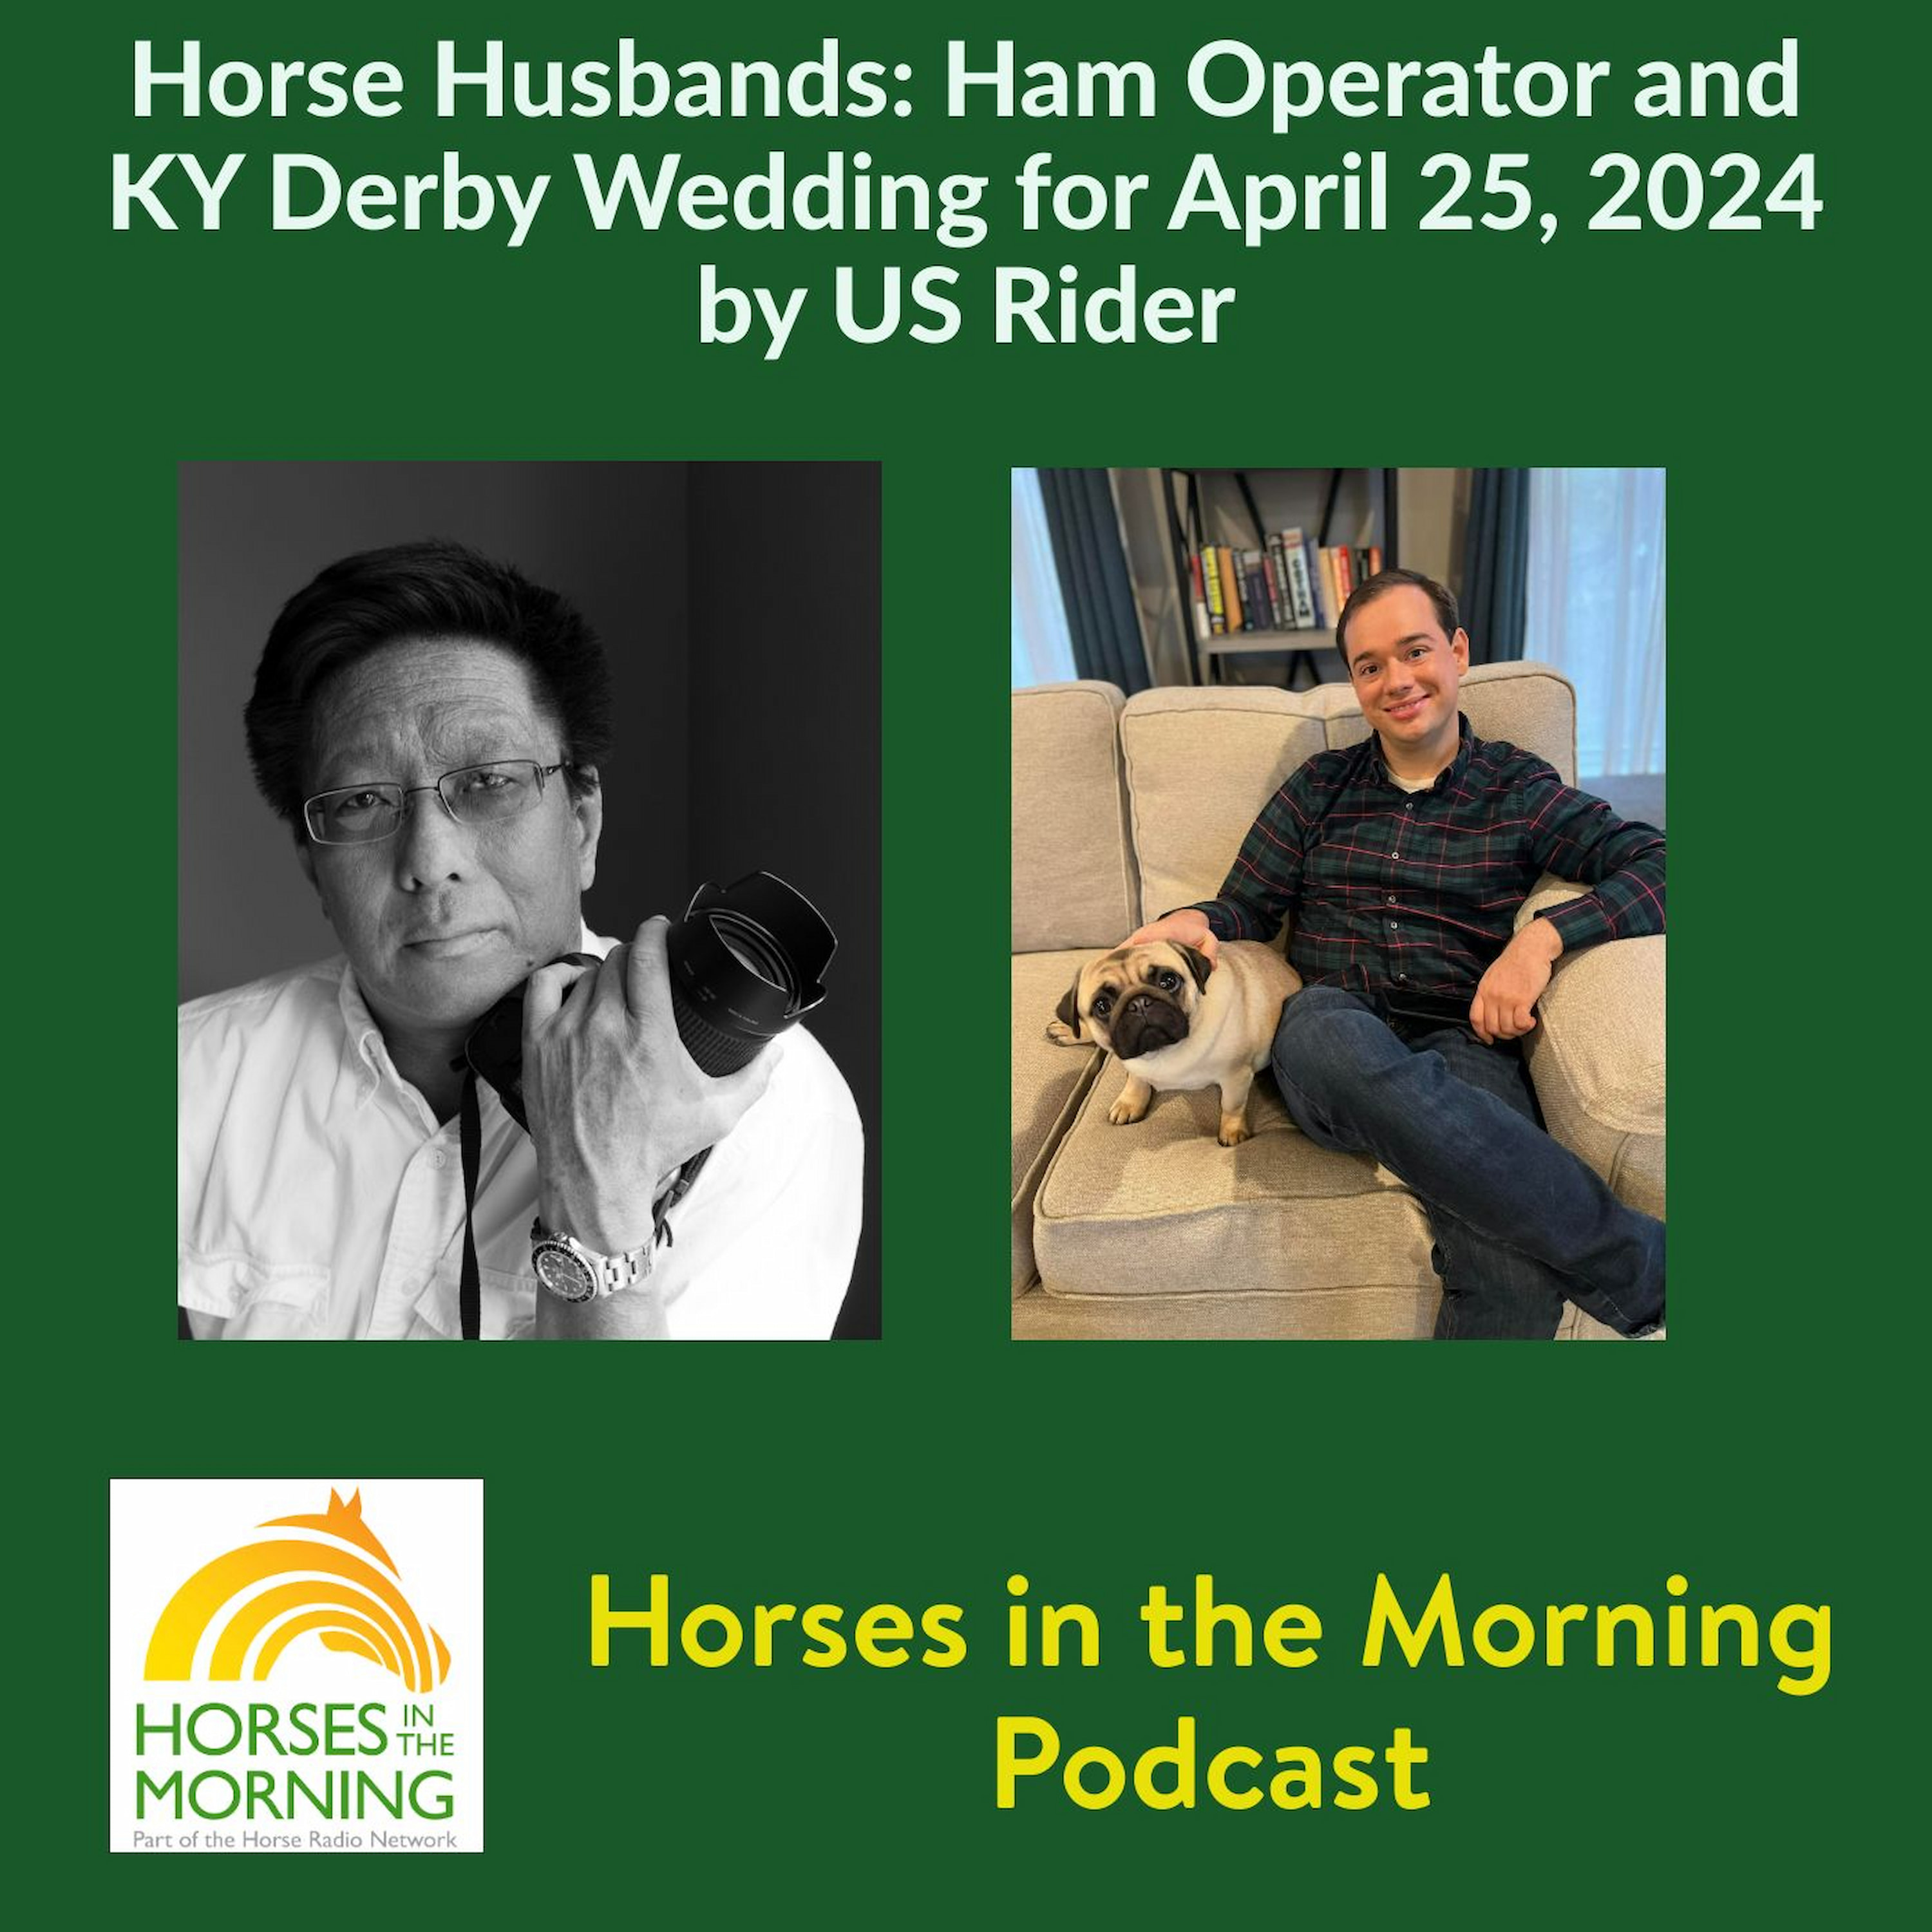 Horse Husbands: Ham Operator and KY Derby Wedding for April 25, 2024 by US Rider - HORSES IN THE MORNING